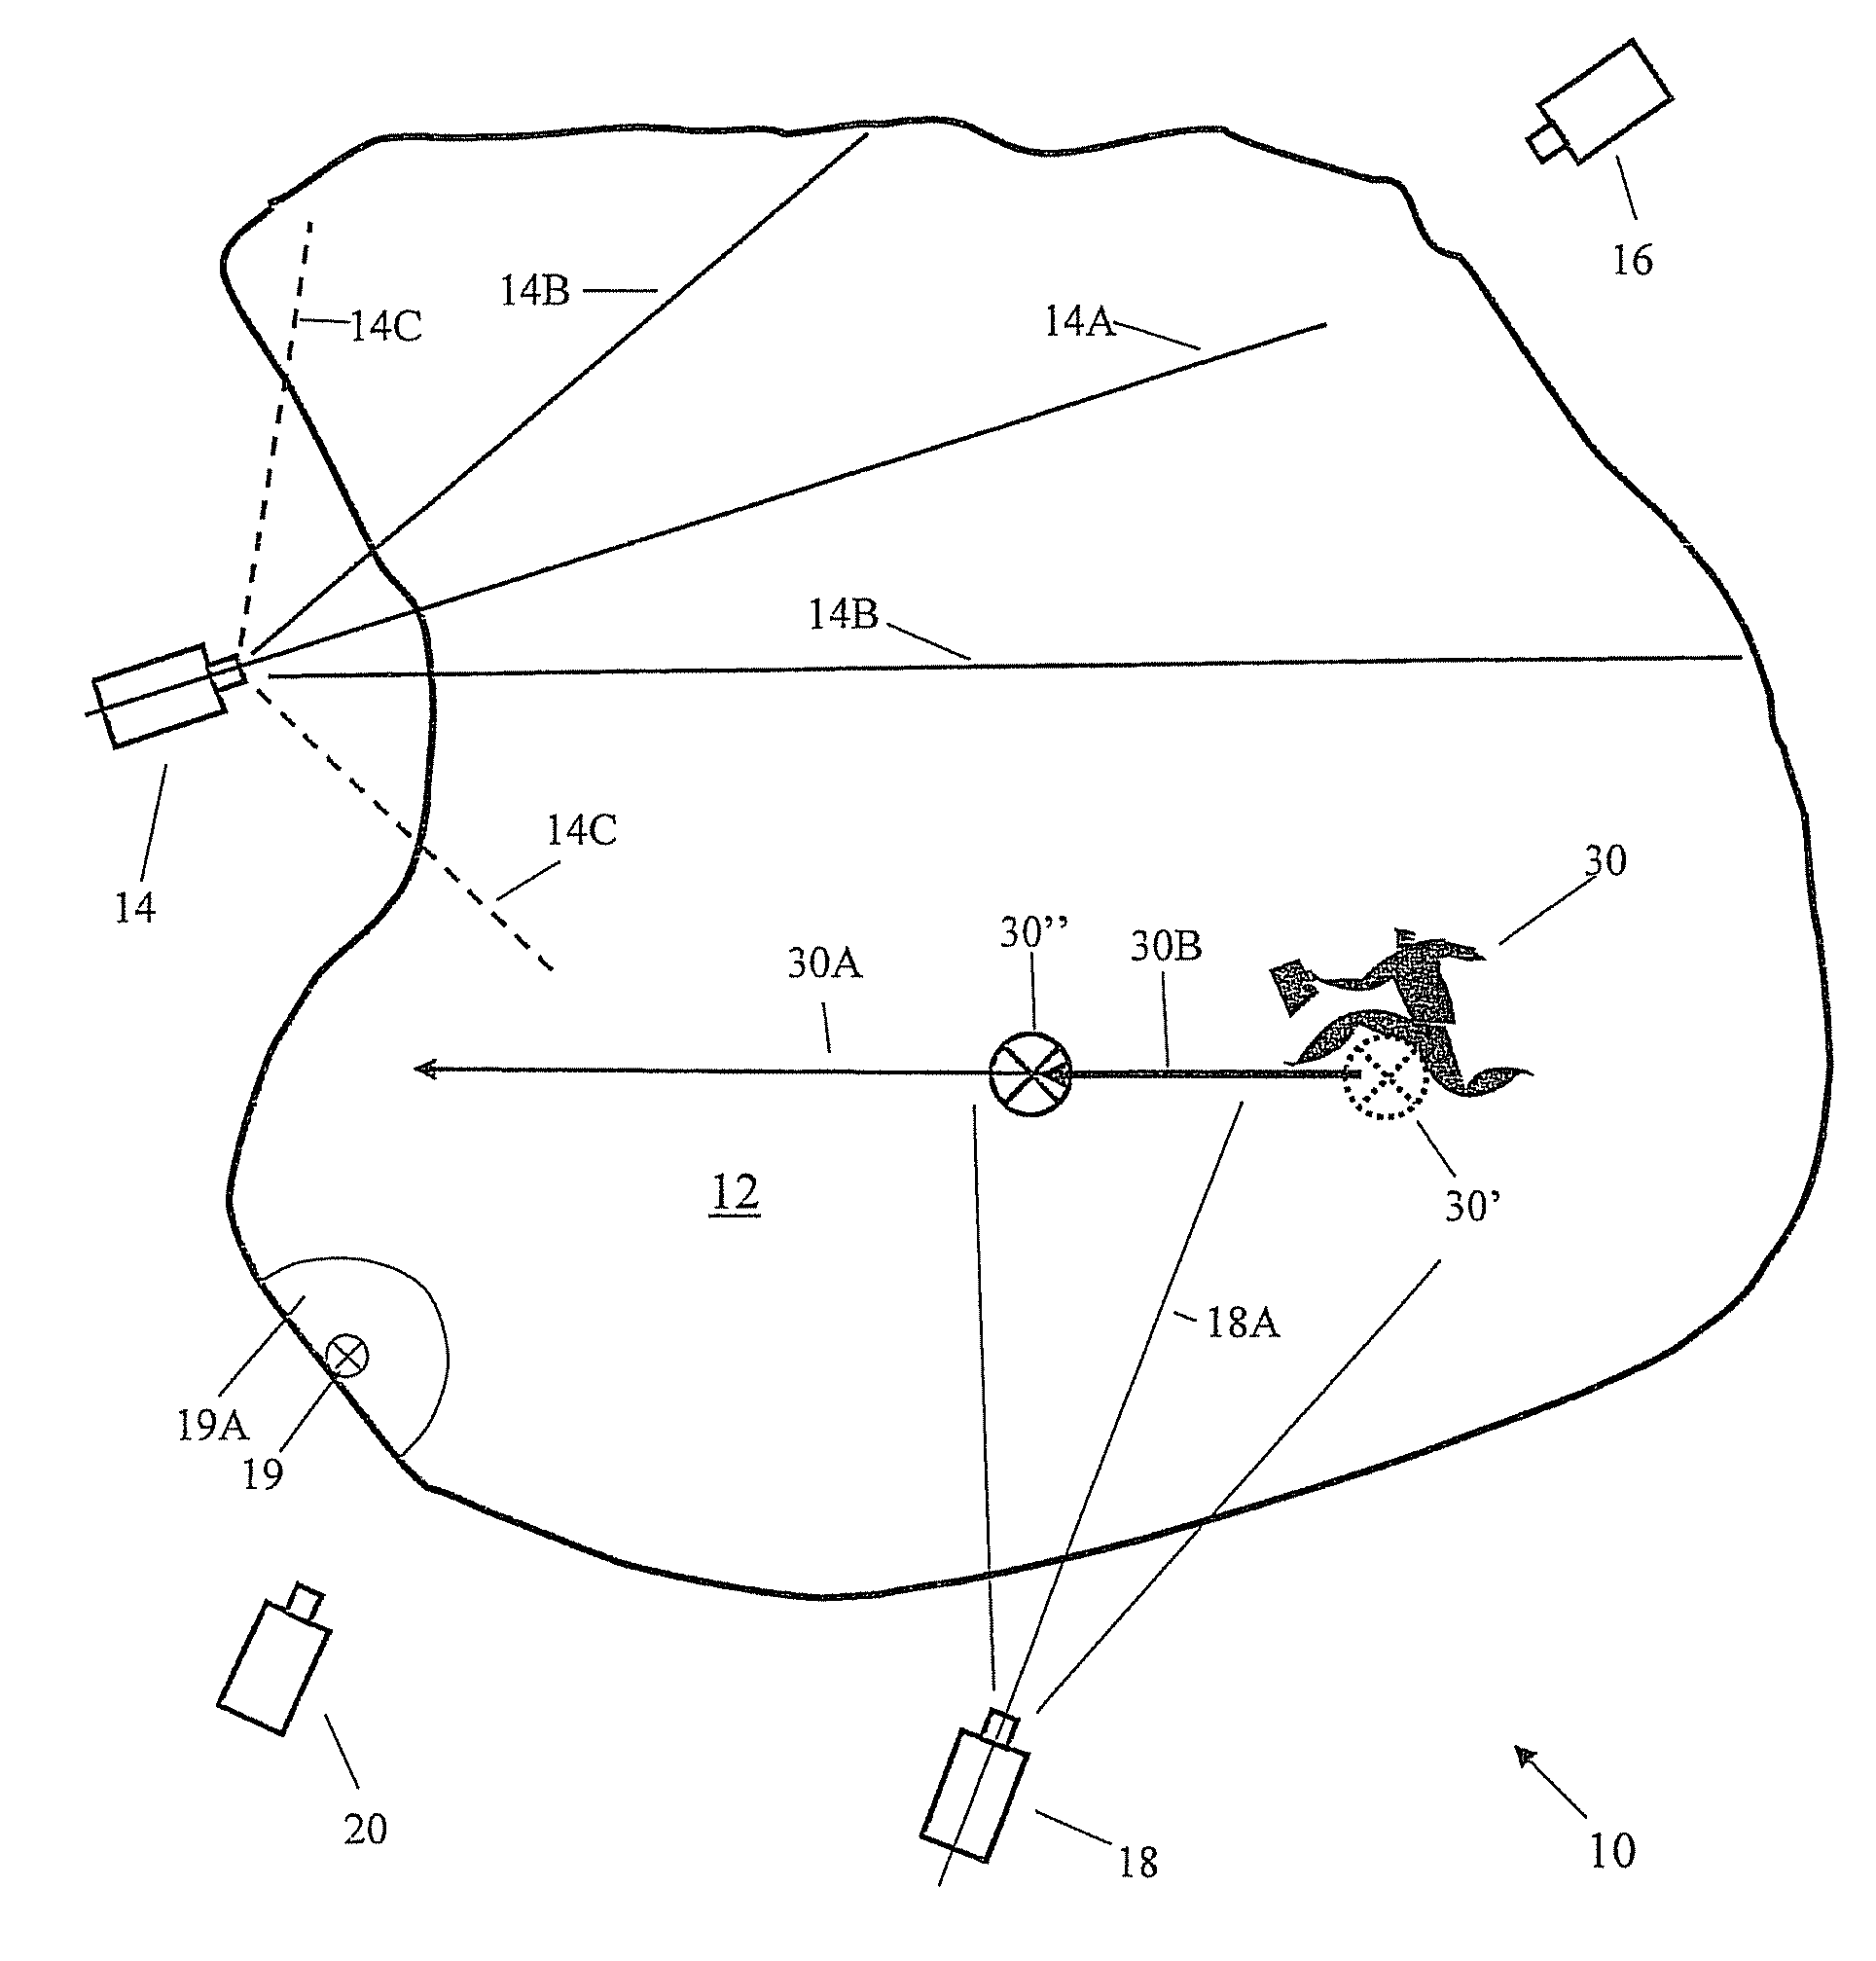 Continuous geospatial tracking system and method